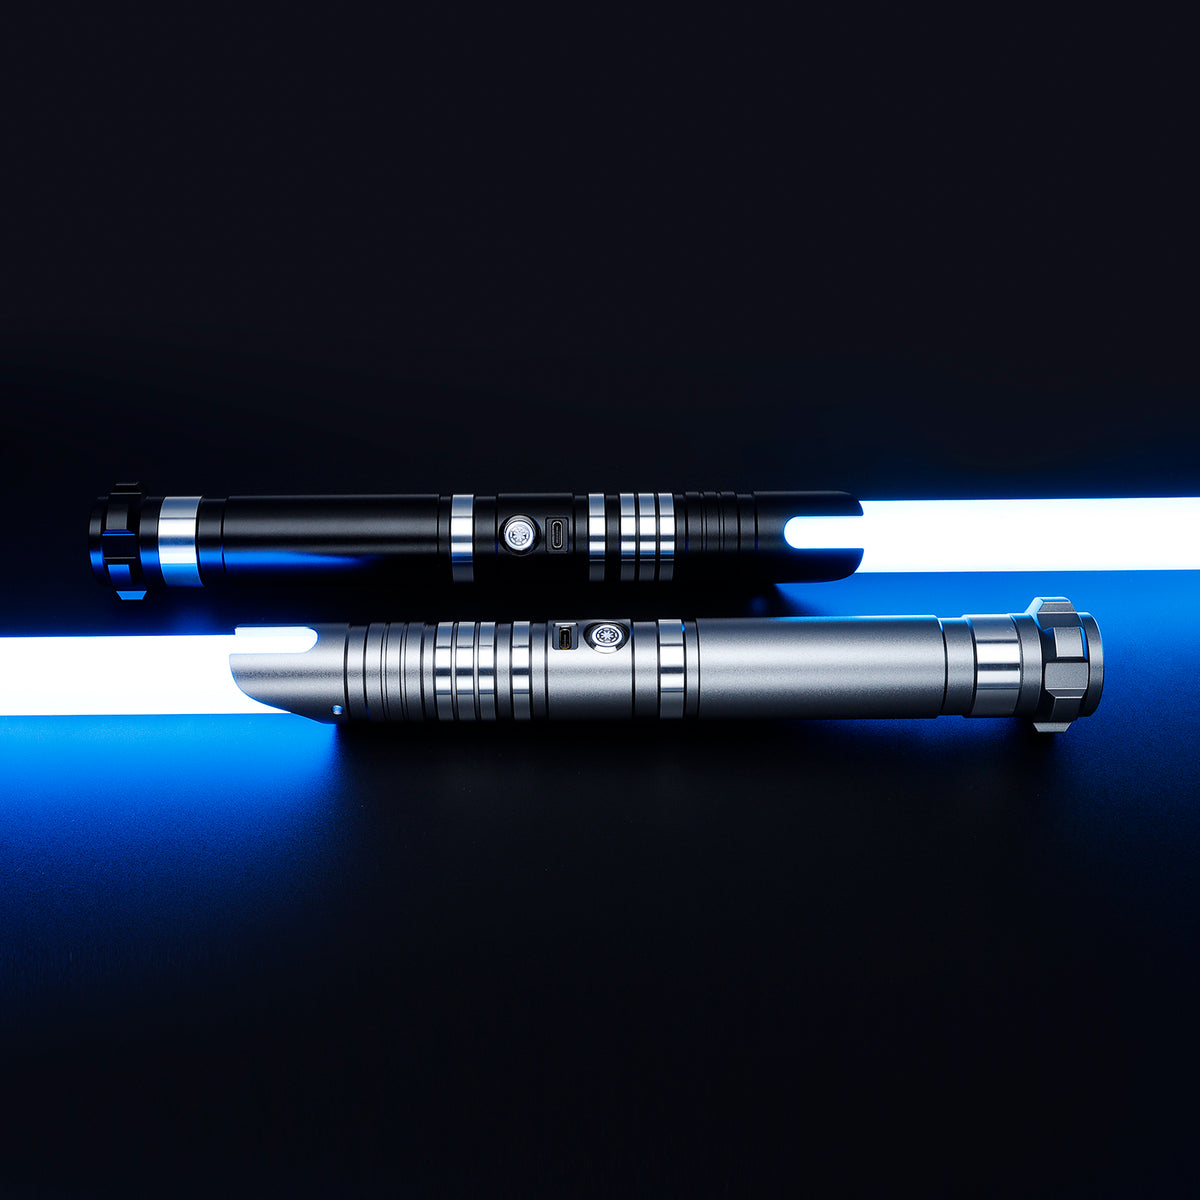 2 x SaberCustom heavy dueling lightsaber fx smooth swing XRGB3.0 infinite color changing 72cm blades C036